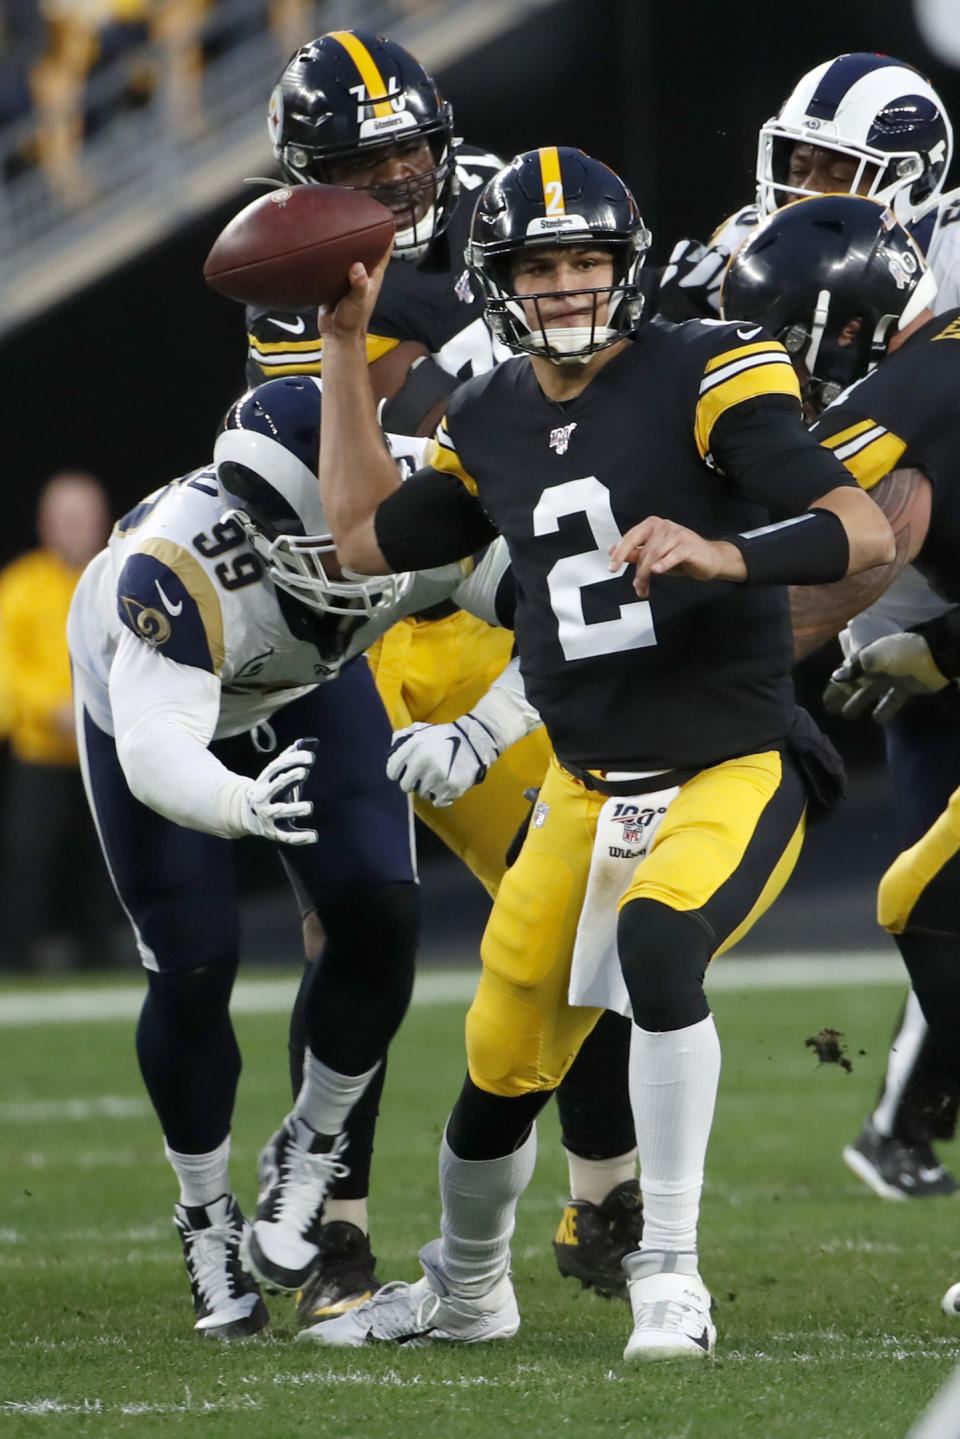 Pittsburgh Steelers quarterback Mason Rudolph (2) prepares to pass under pressure by Los Angeles Rams defensive tackle Aaron Donald (99) during the first half of an NFL football game in Pittsburgh, Sunday, Nov. 10, 2019. (AP Photo/Don Wright)